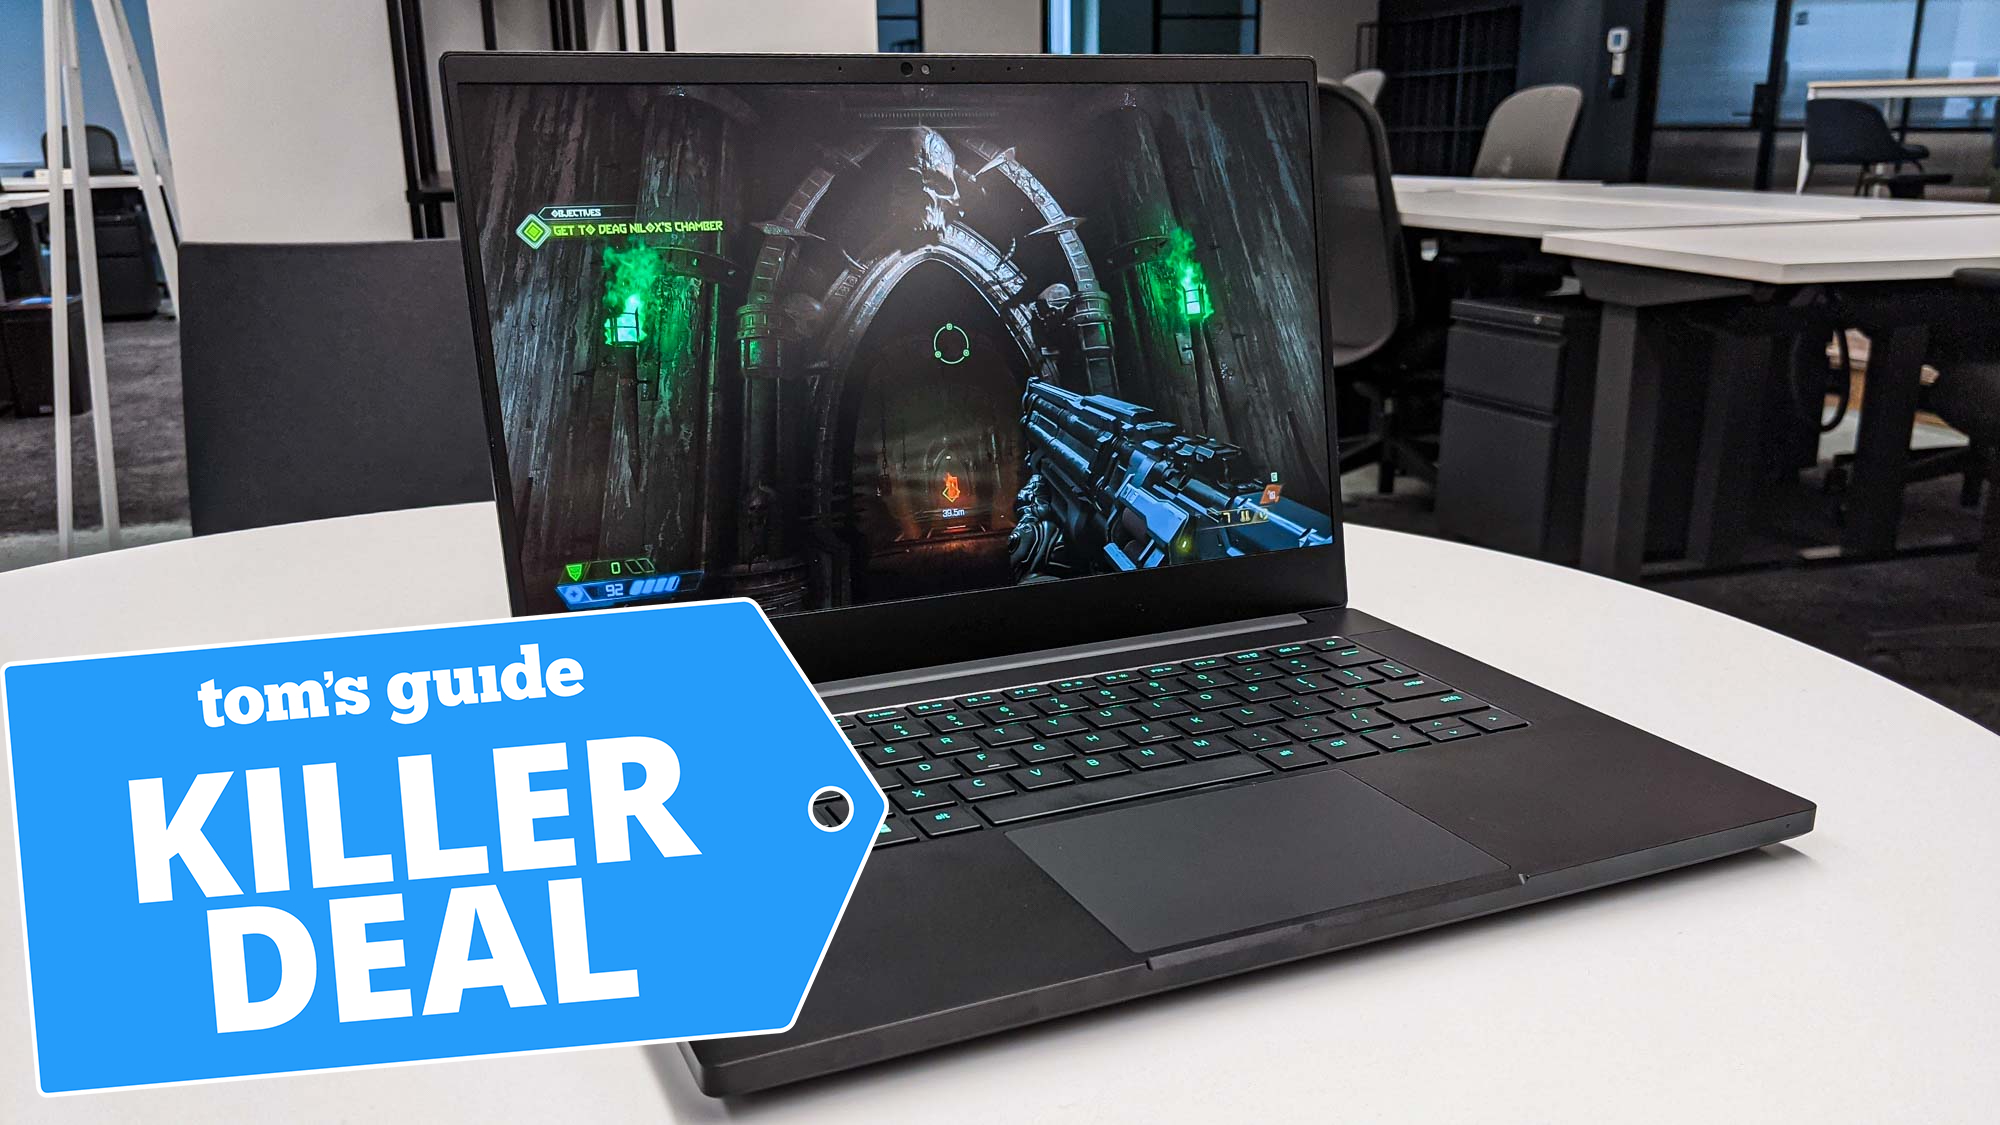 Razer Blade 14 with deal tag overlaid